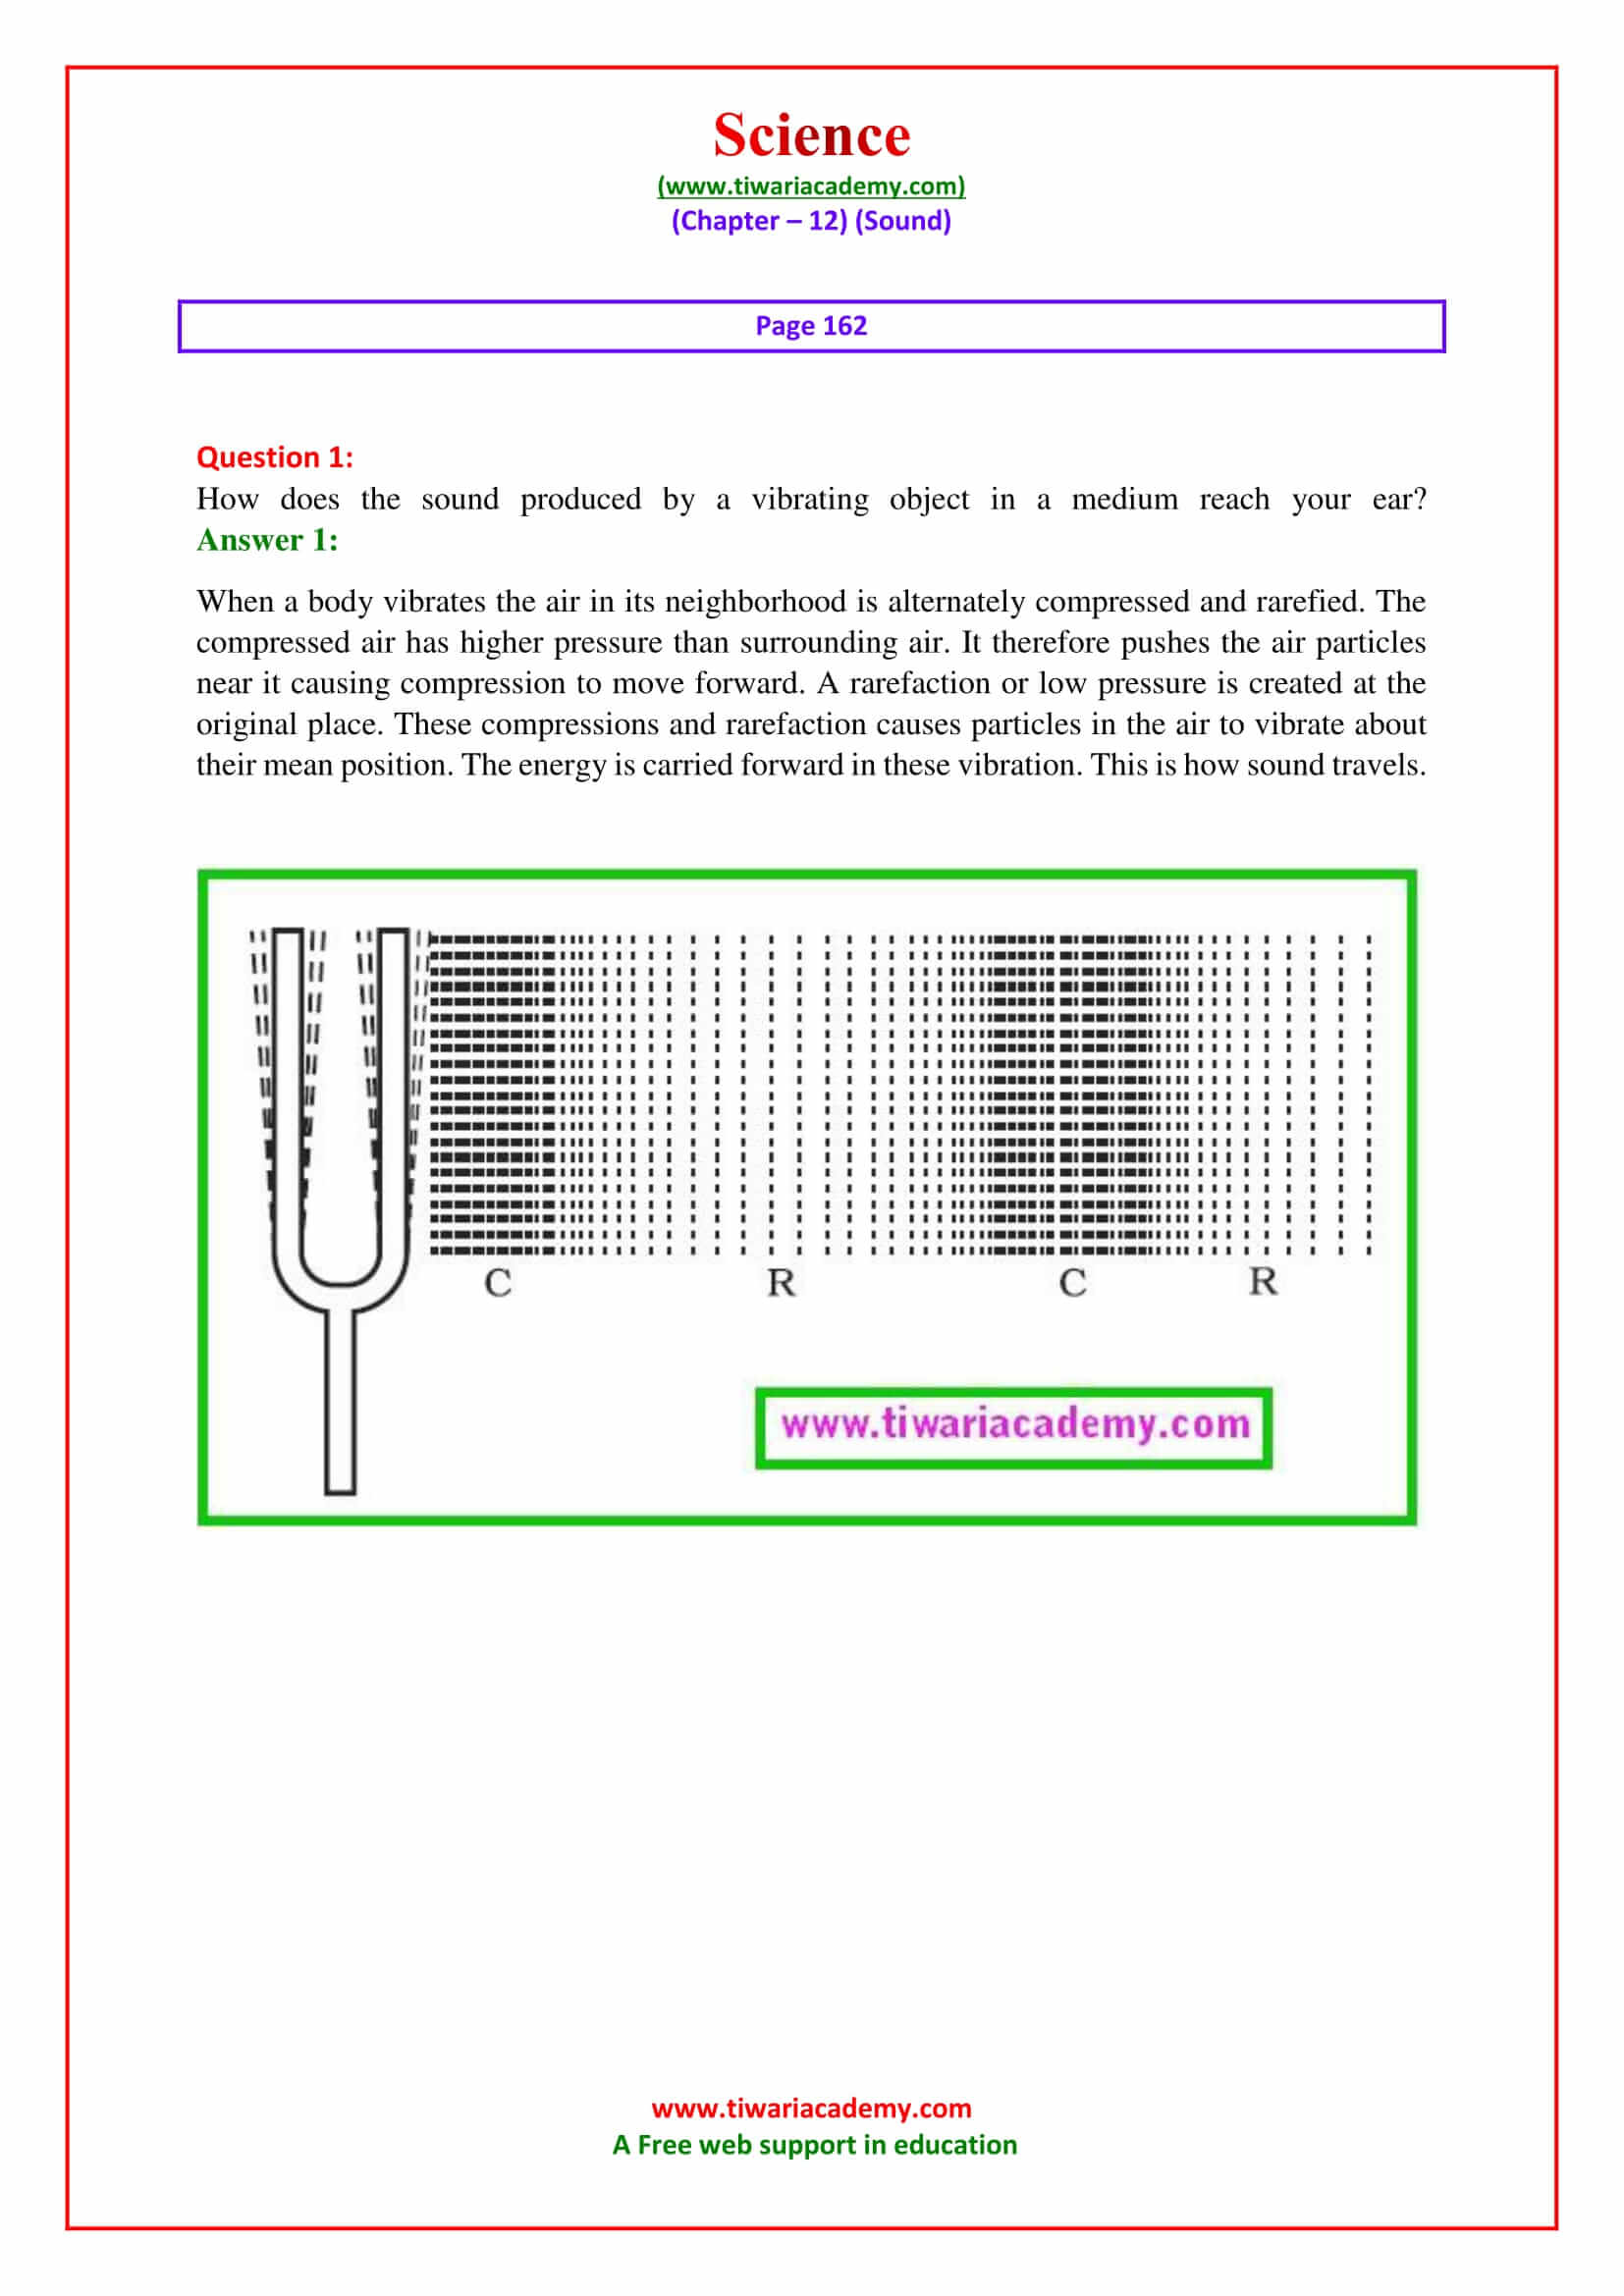 NCERT Solutions for Class 9 Science Chapter 12 Sound page 162